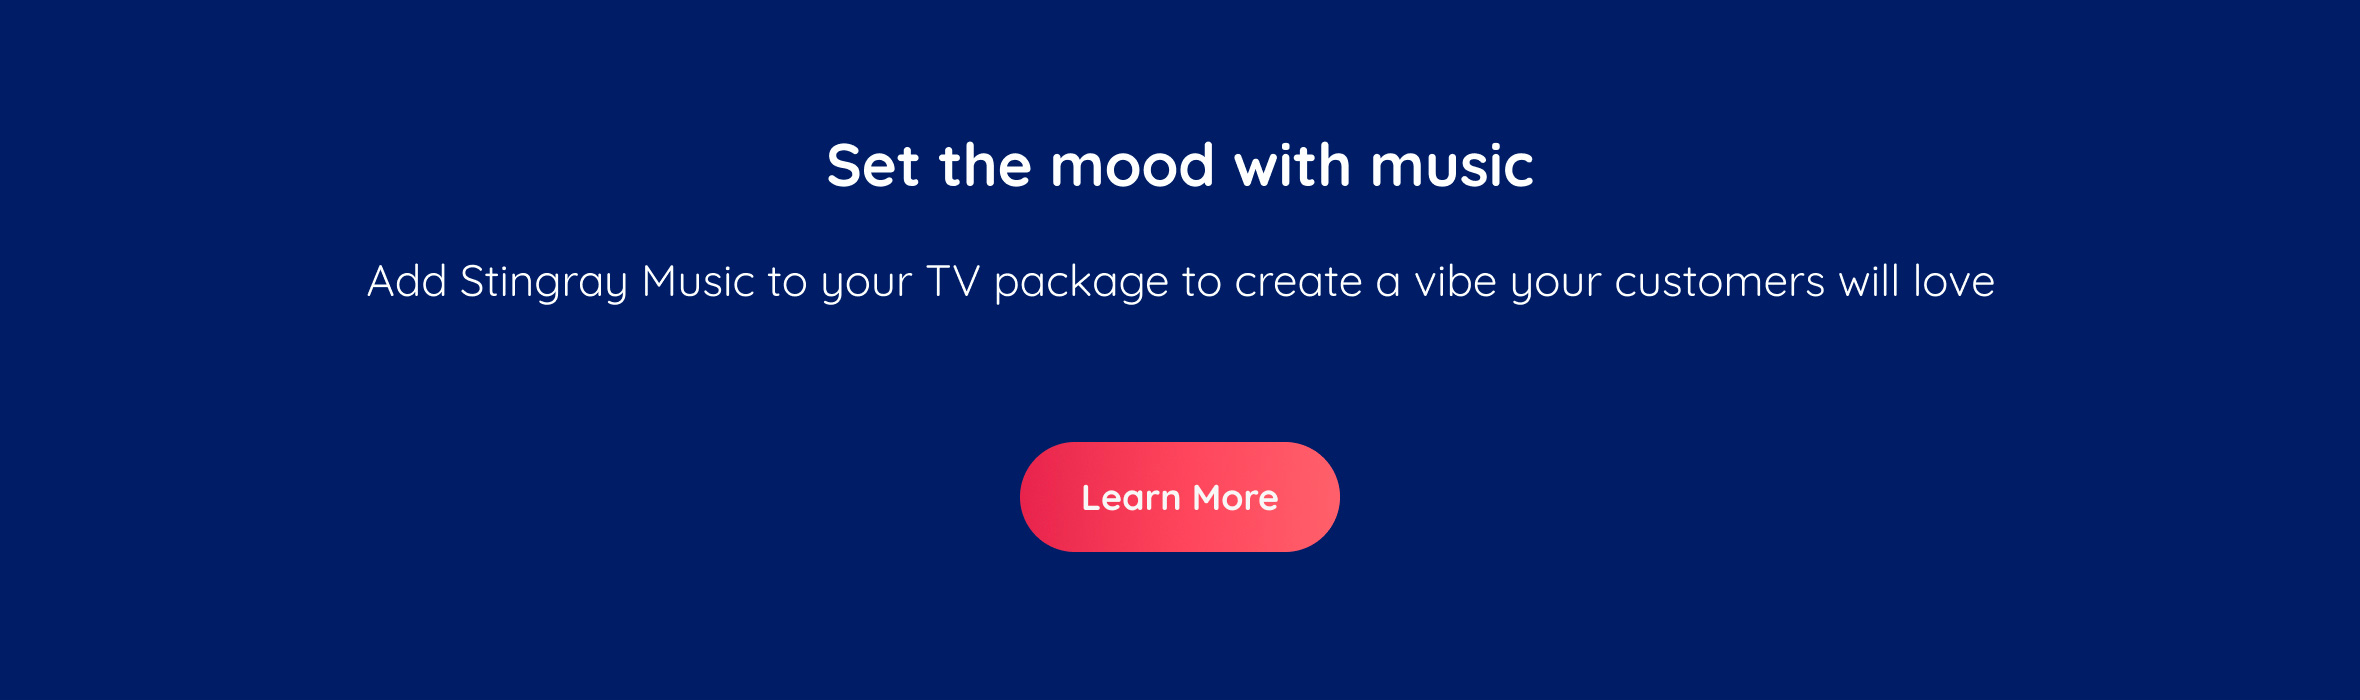 Set the mood with music. Add Stingray Music to your TV package to create the vide your customers will love. Learn more.